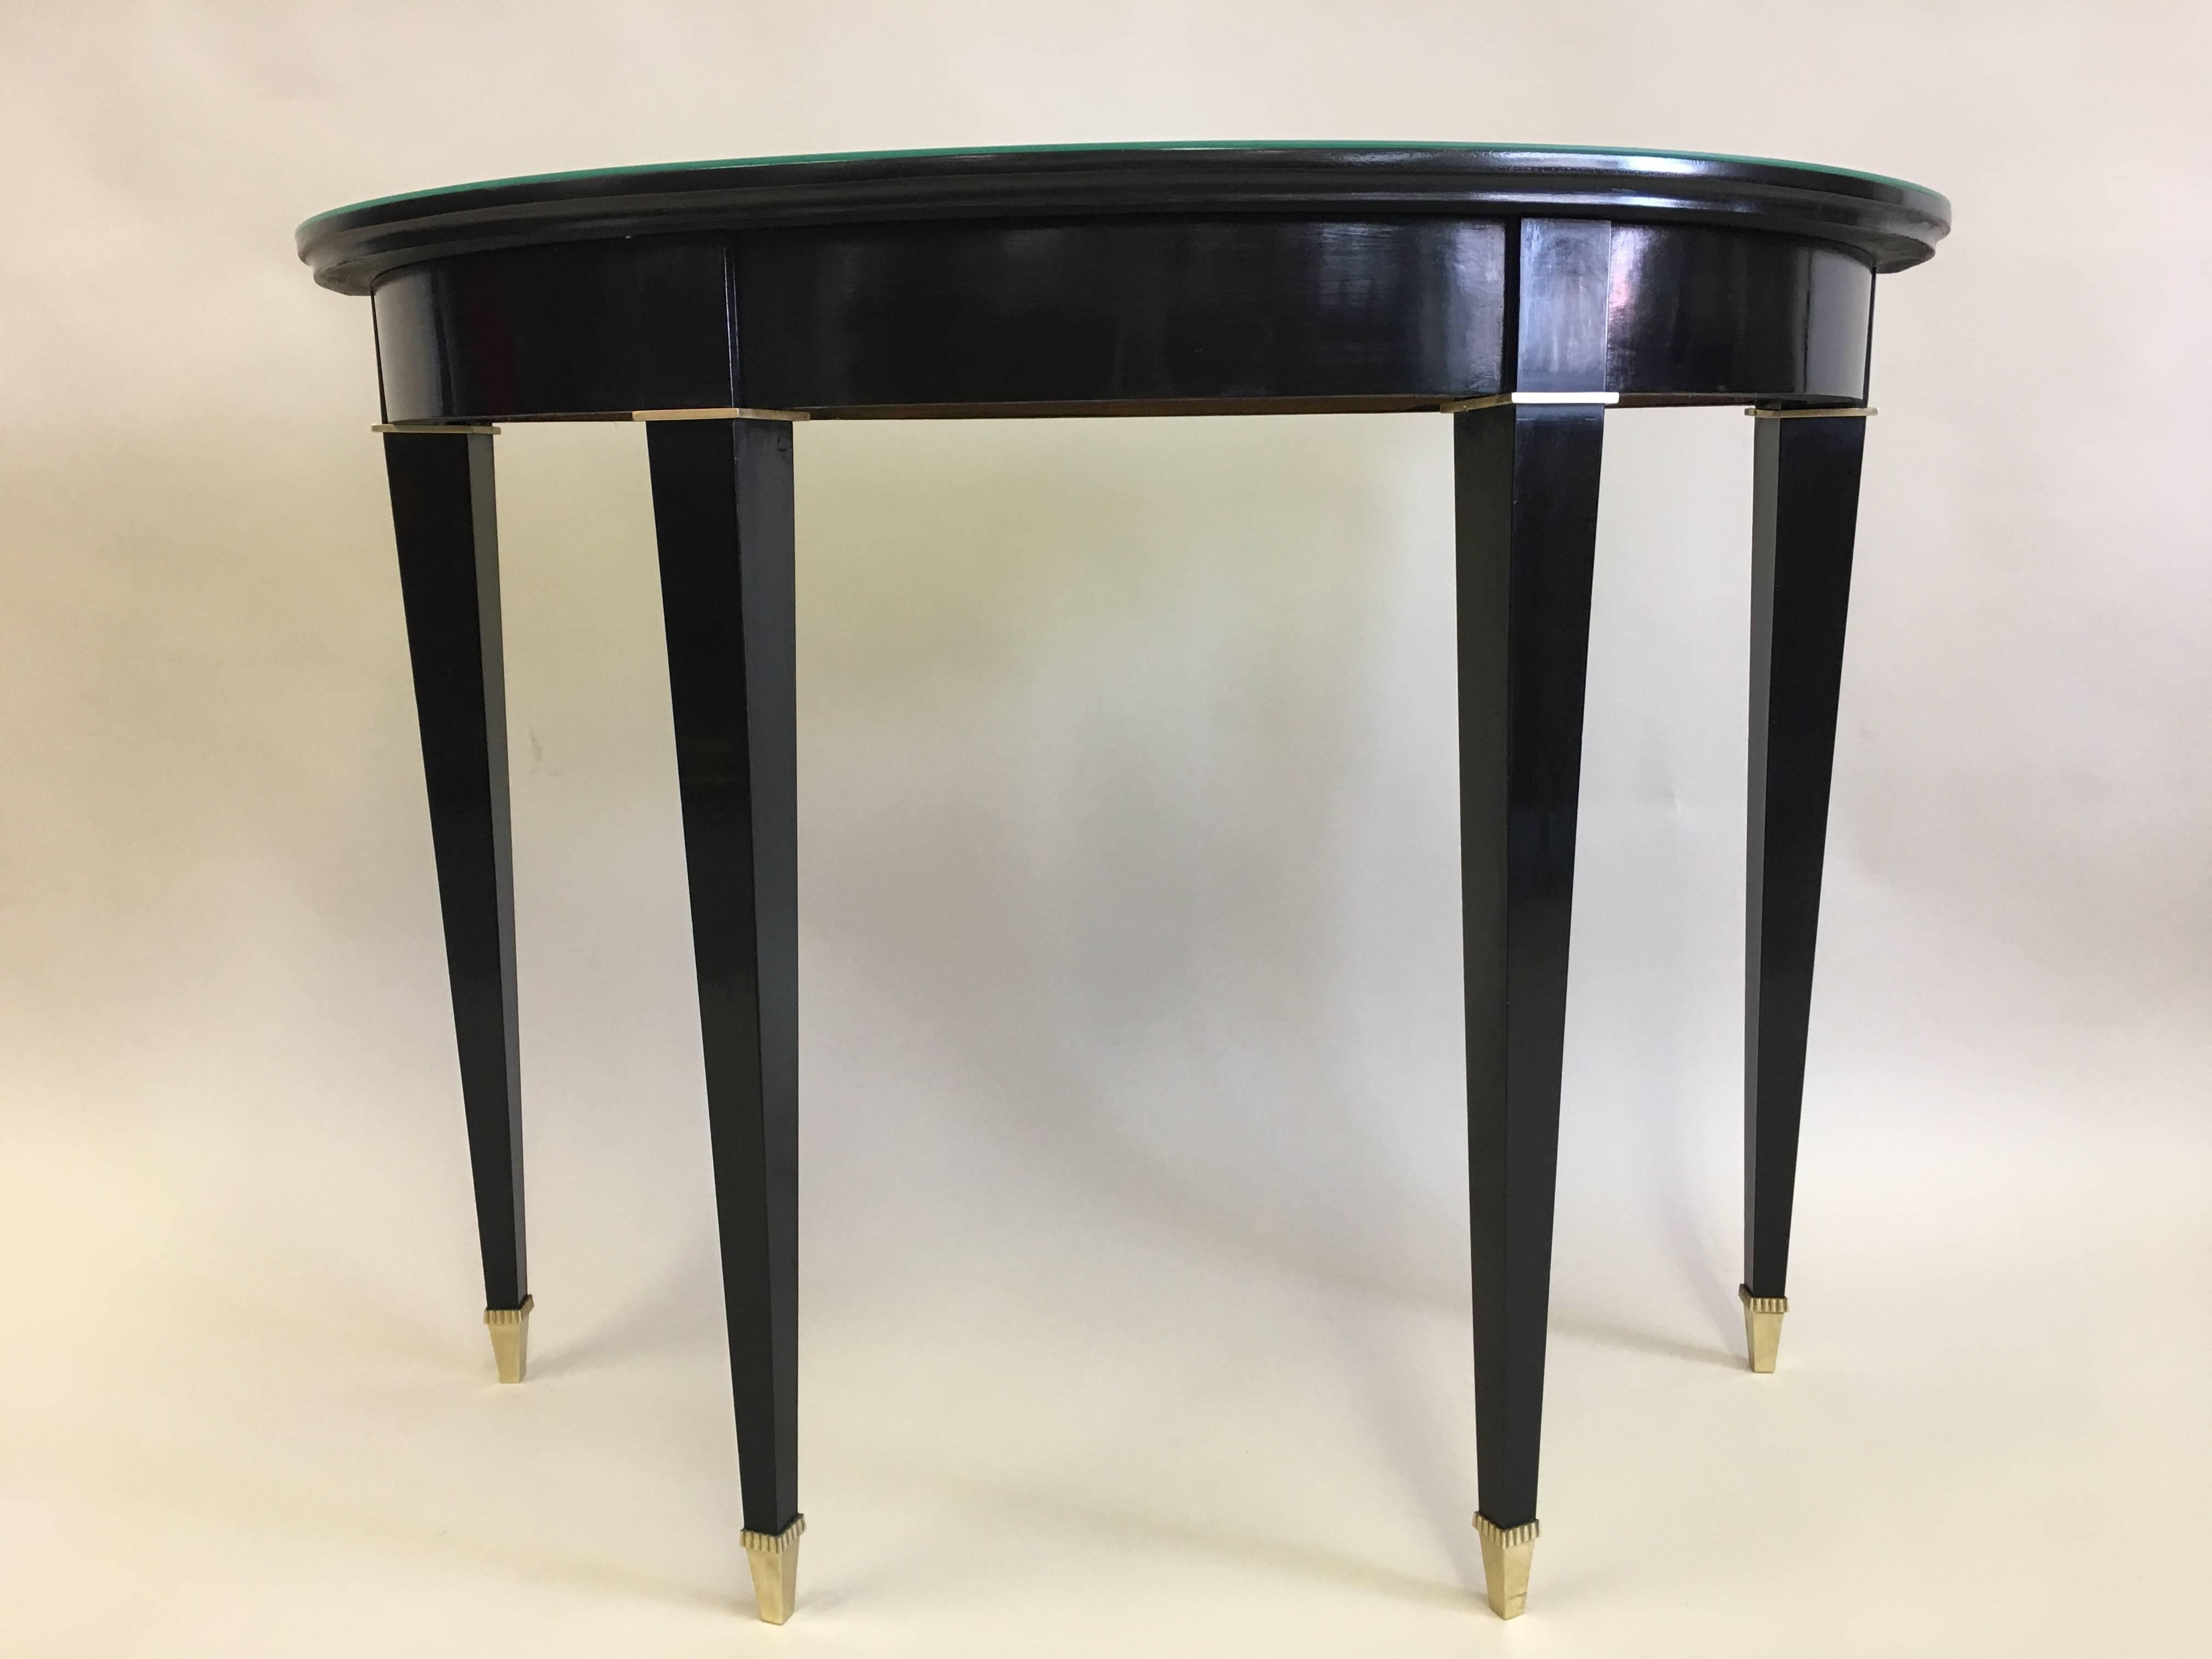 Lacquered French Modern Neoclassical Black Lacquer Demilune Console Attr. to Andre Arbus For Sale